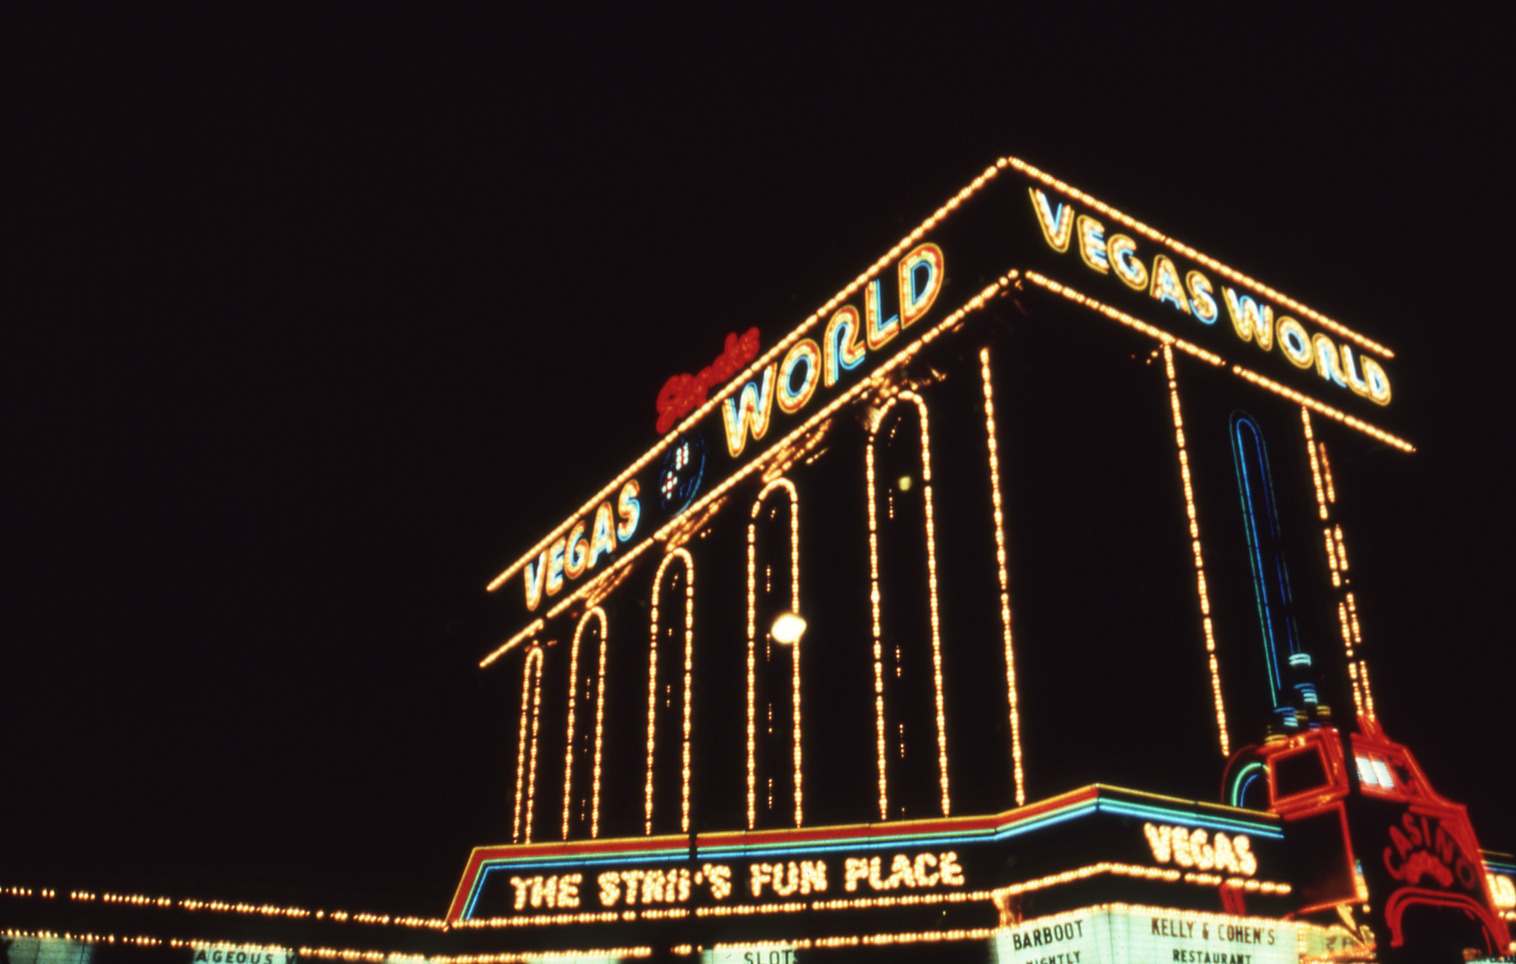 Vegas World marquee and wall signs, Las Vegas, Nevada: photographic print